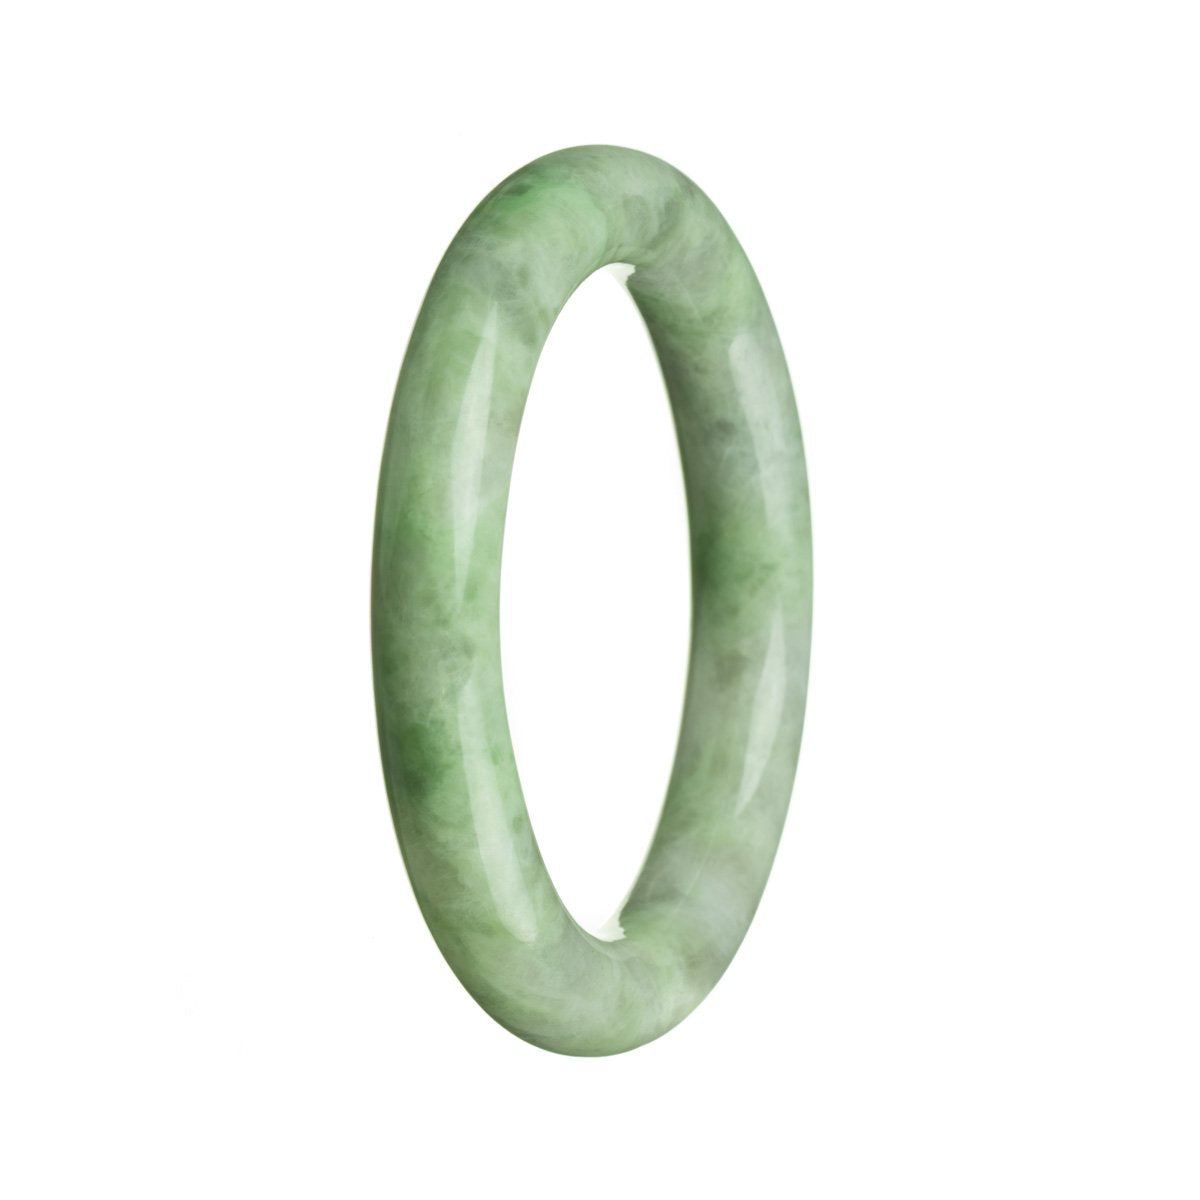 A round Real Grade A Green Jade Bracelet, measuring 56mm in diameter, with the brand name MAYS.